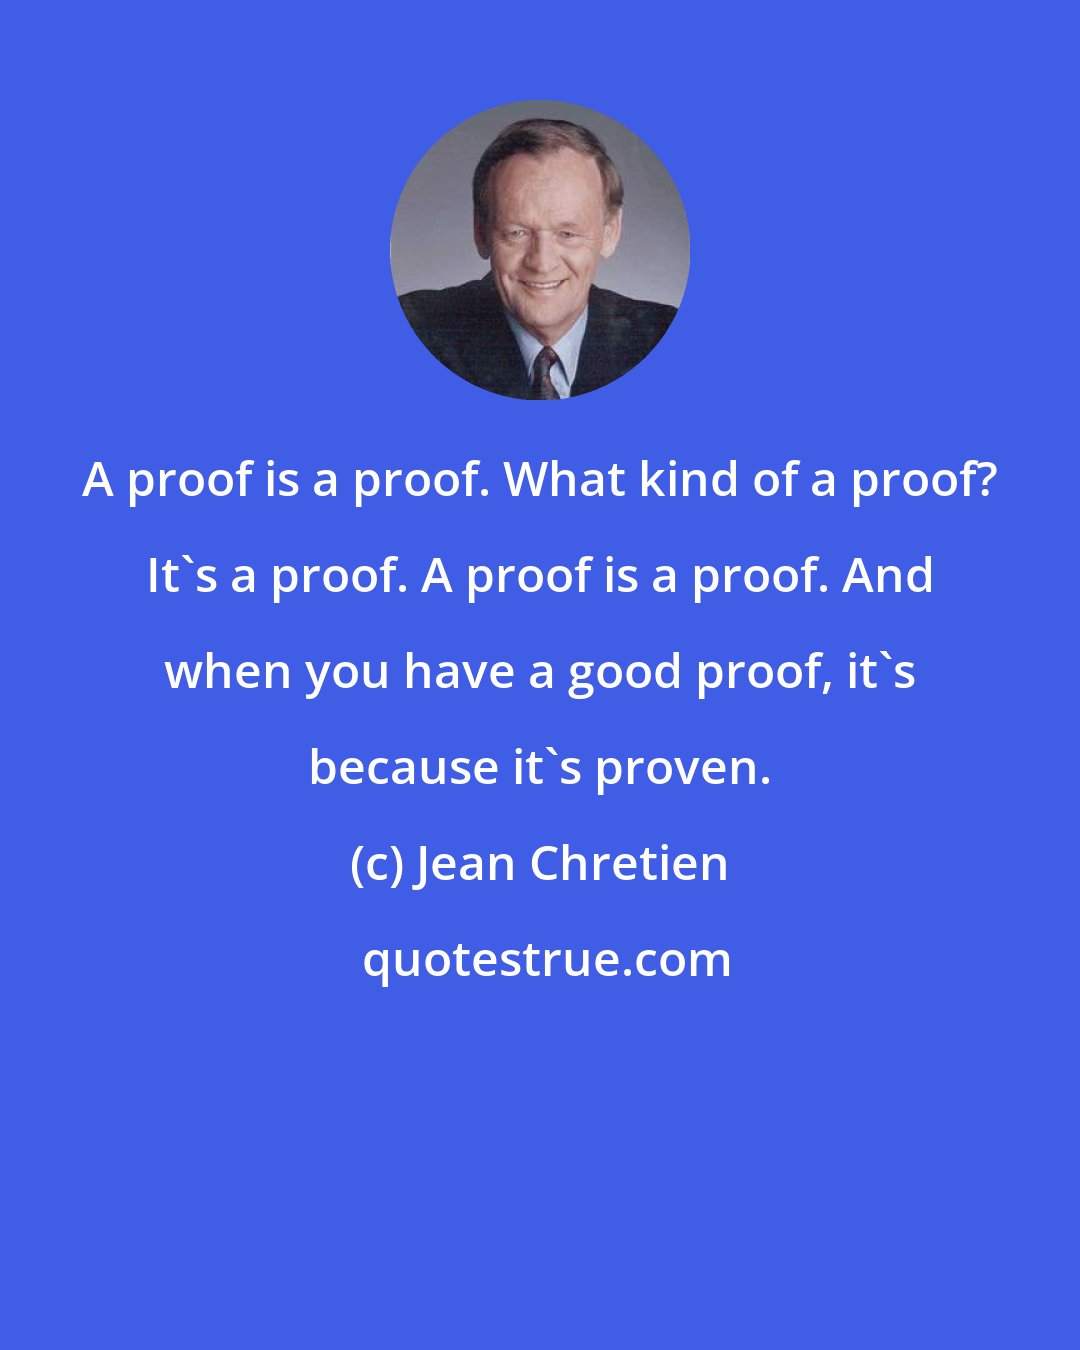 Jean Chretien: A proof is a proof. What kind of a proof? It's a proof. A proof is a proof. And when you have a good proof, it's because it's proven.